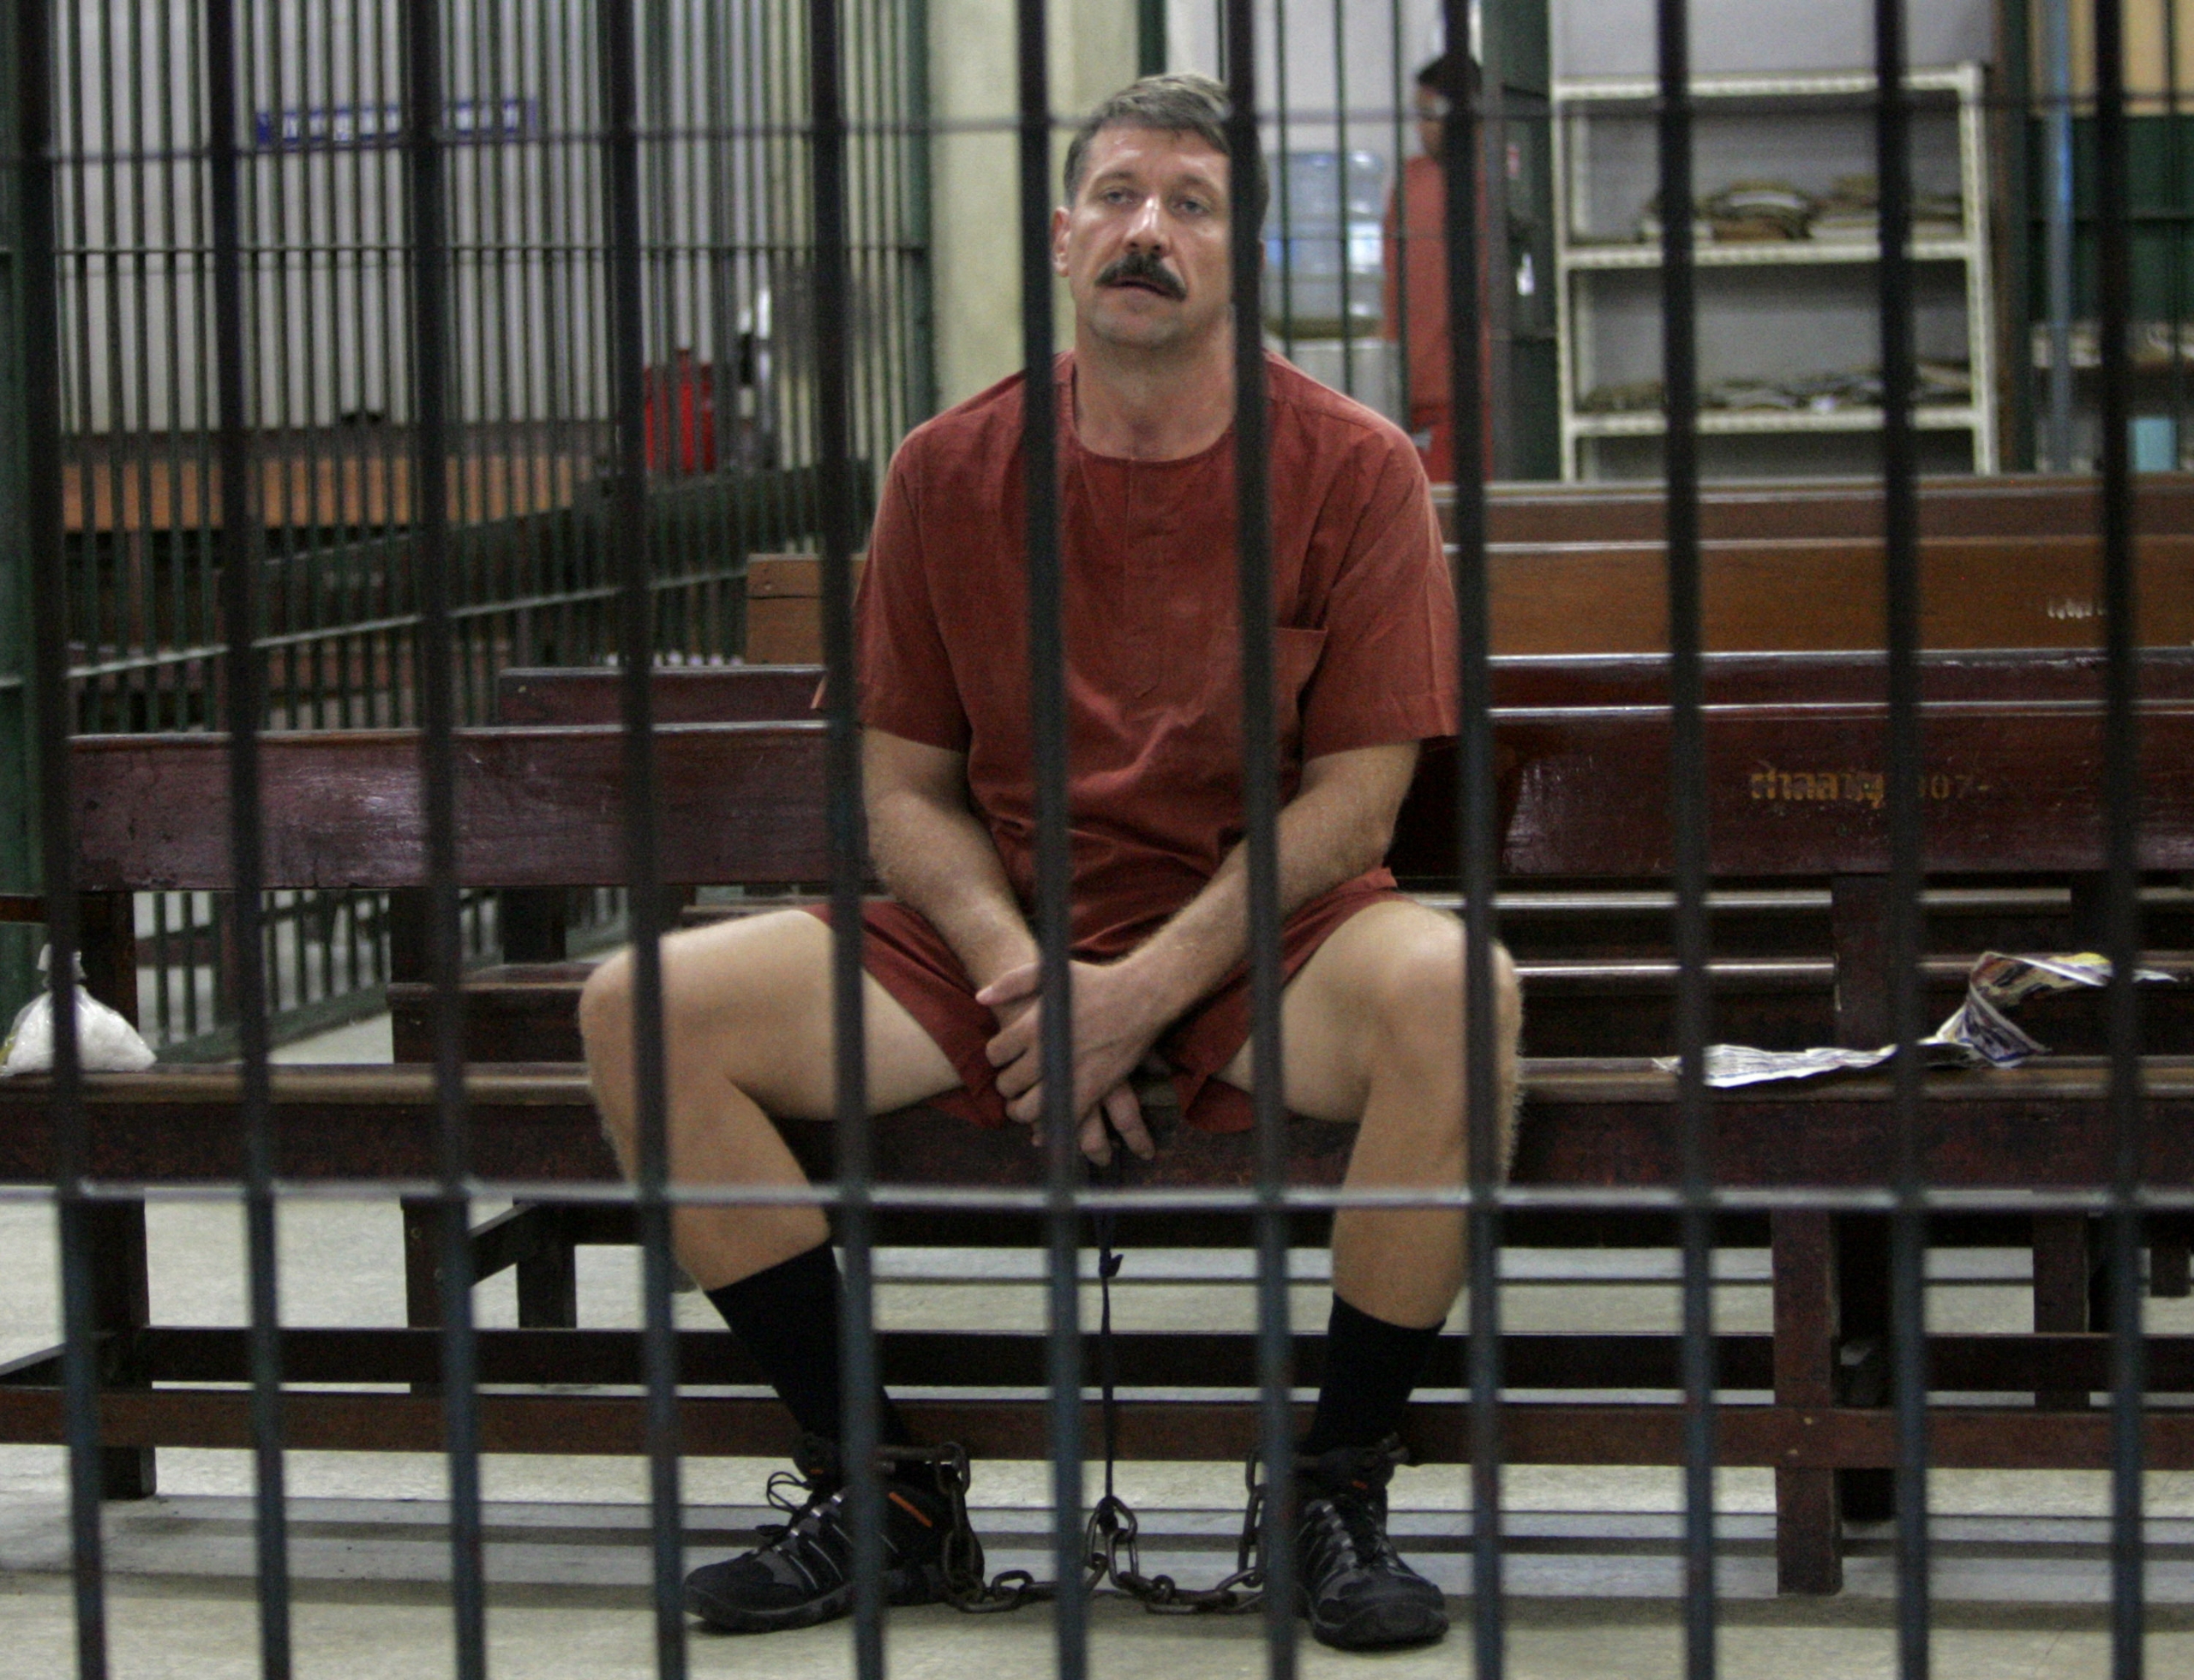 The Pentagon Fears Viktor Bout May Go Back to Arms Trafficking, Causing Worldly Conflicts